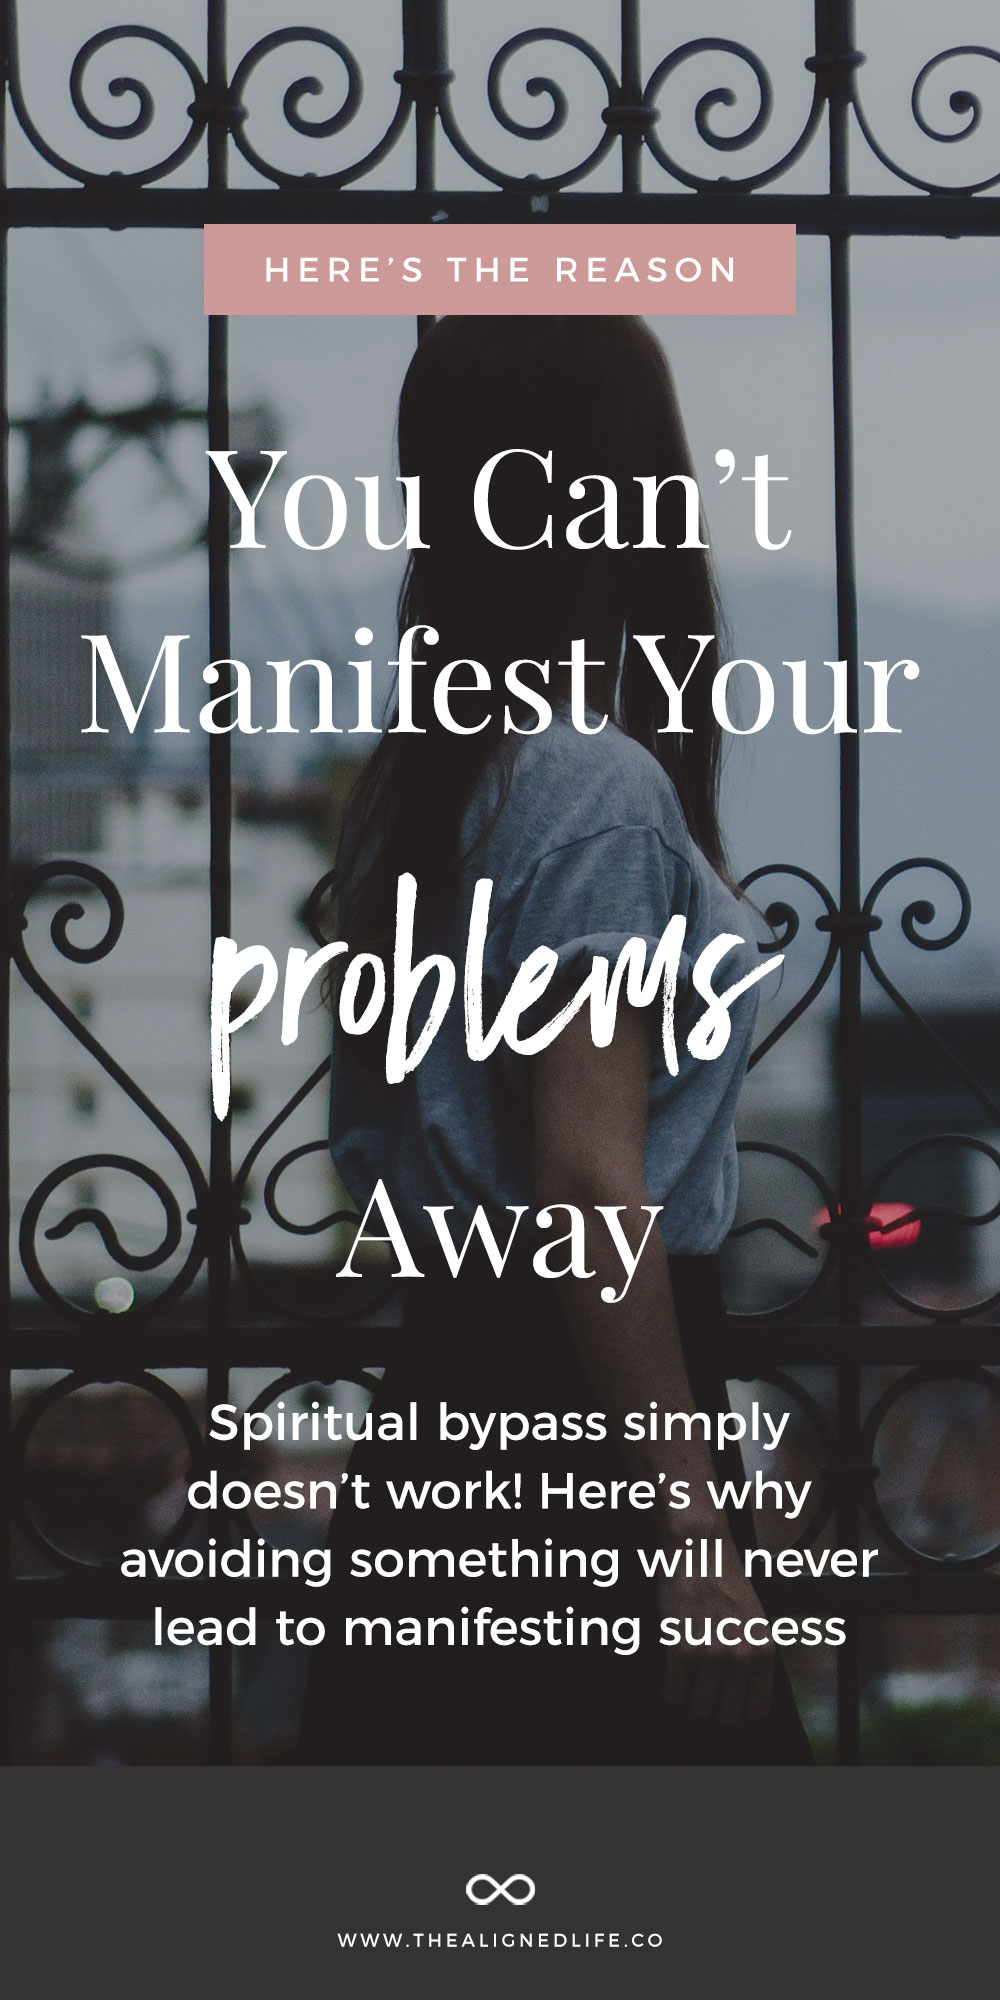 The Reason You Can't Manifest Your Problems Away: Avoidance + The Law of Attraction